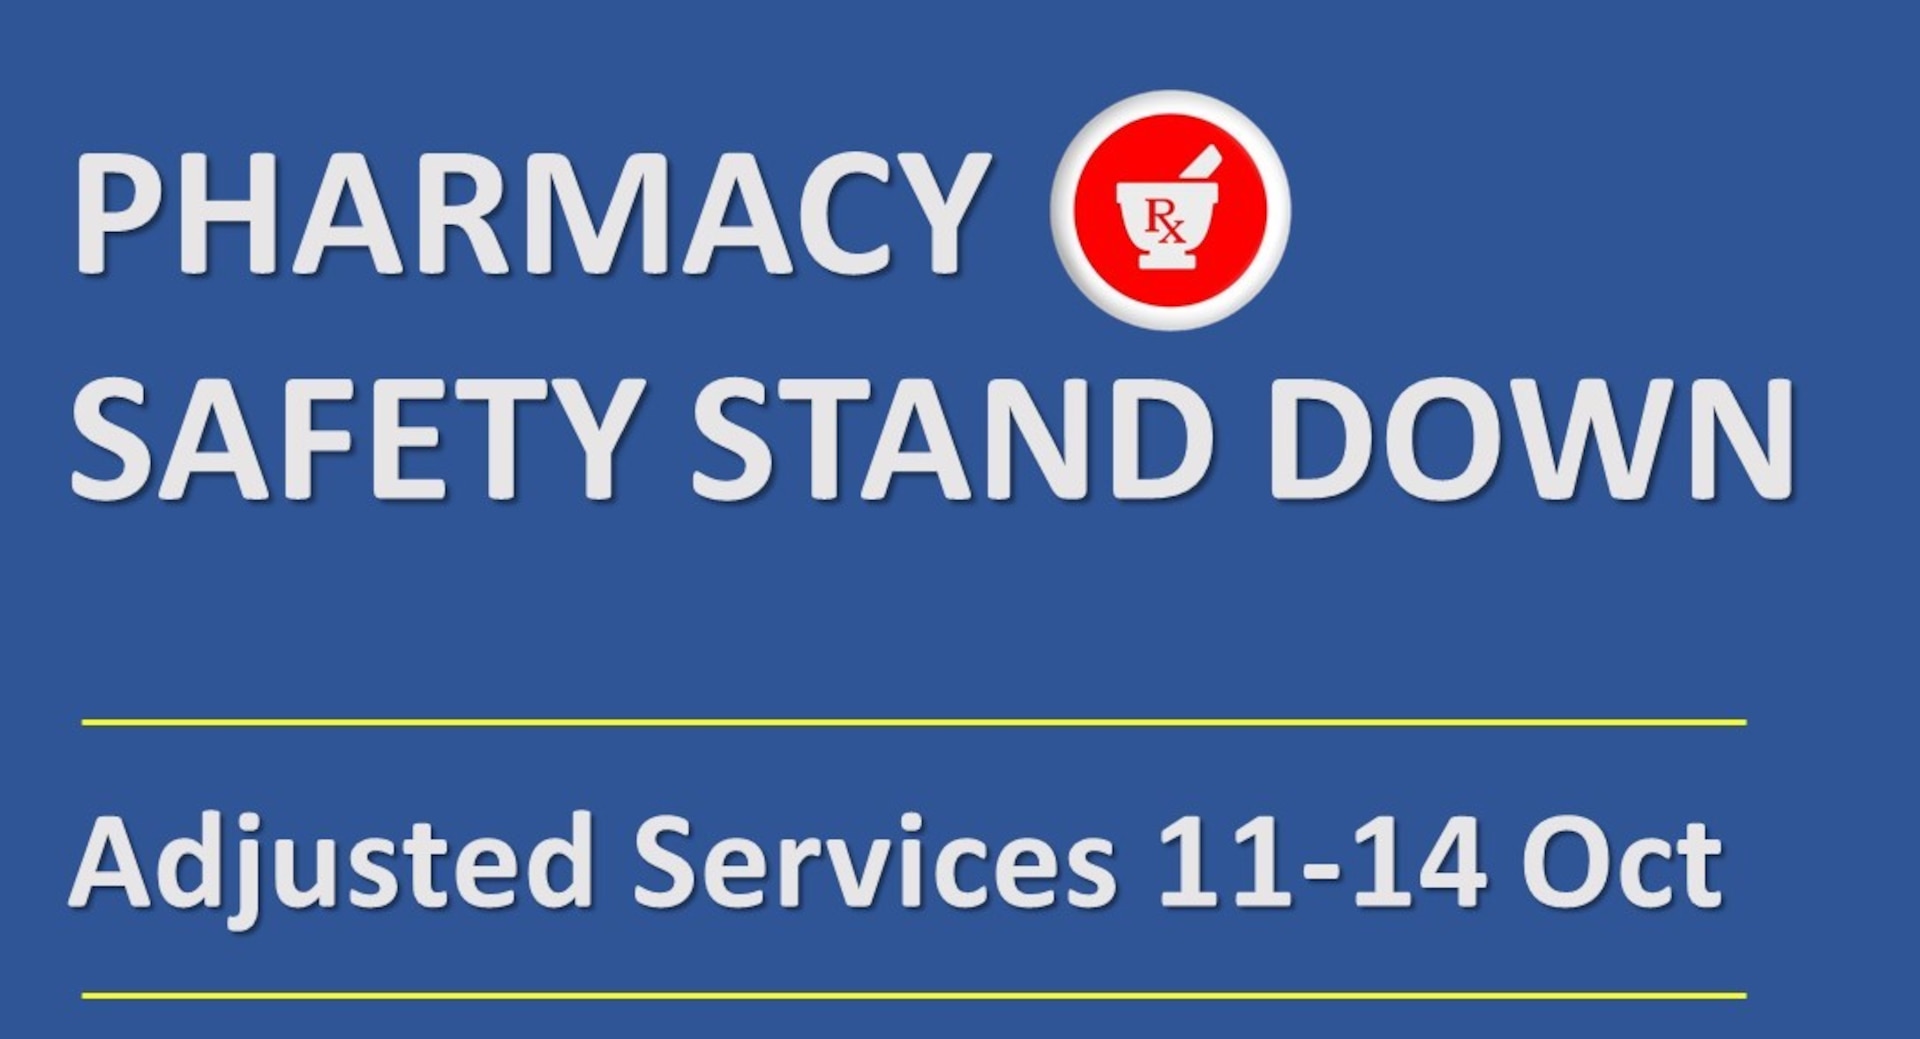 PHARMACY SAFETY STAND DOWN OCTOBER 13-14